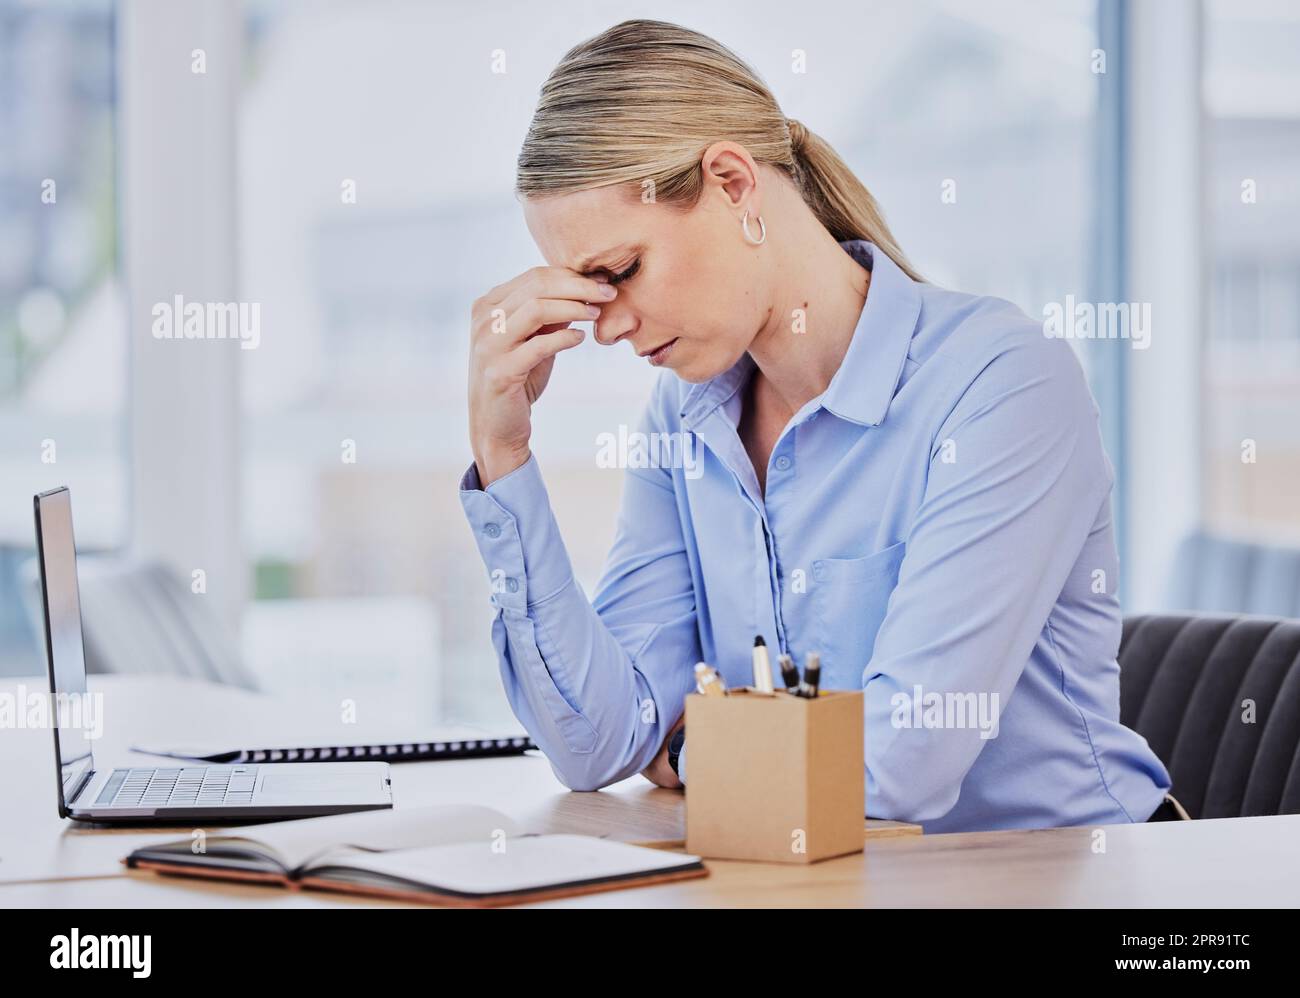 Young frustrated caucasian business woman working at office desk suffering from chronic headaches while sitting in front of laptop. Female professional looking stressed and overworked Stock Photo